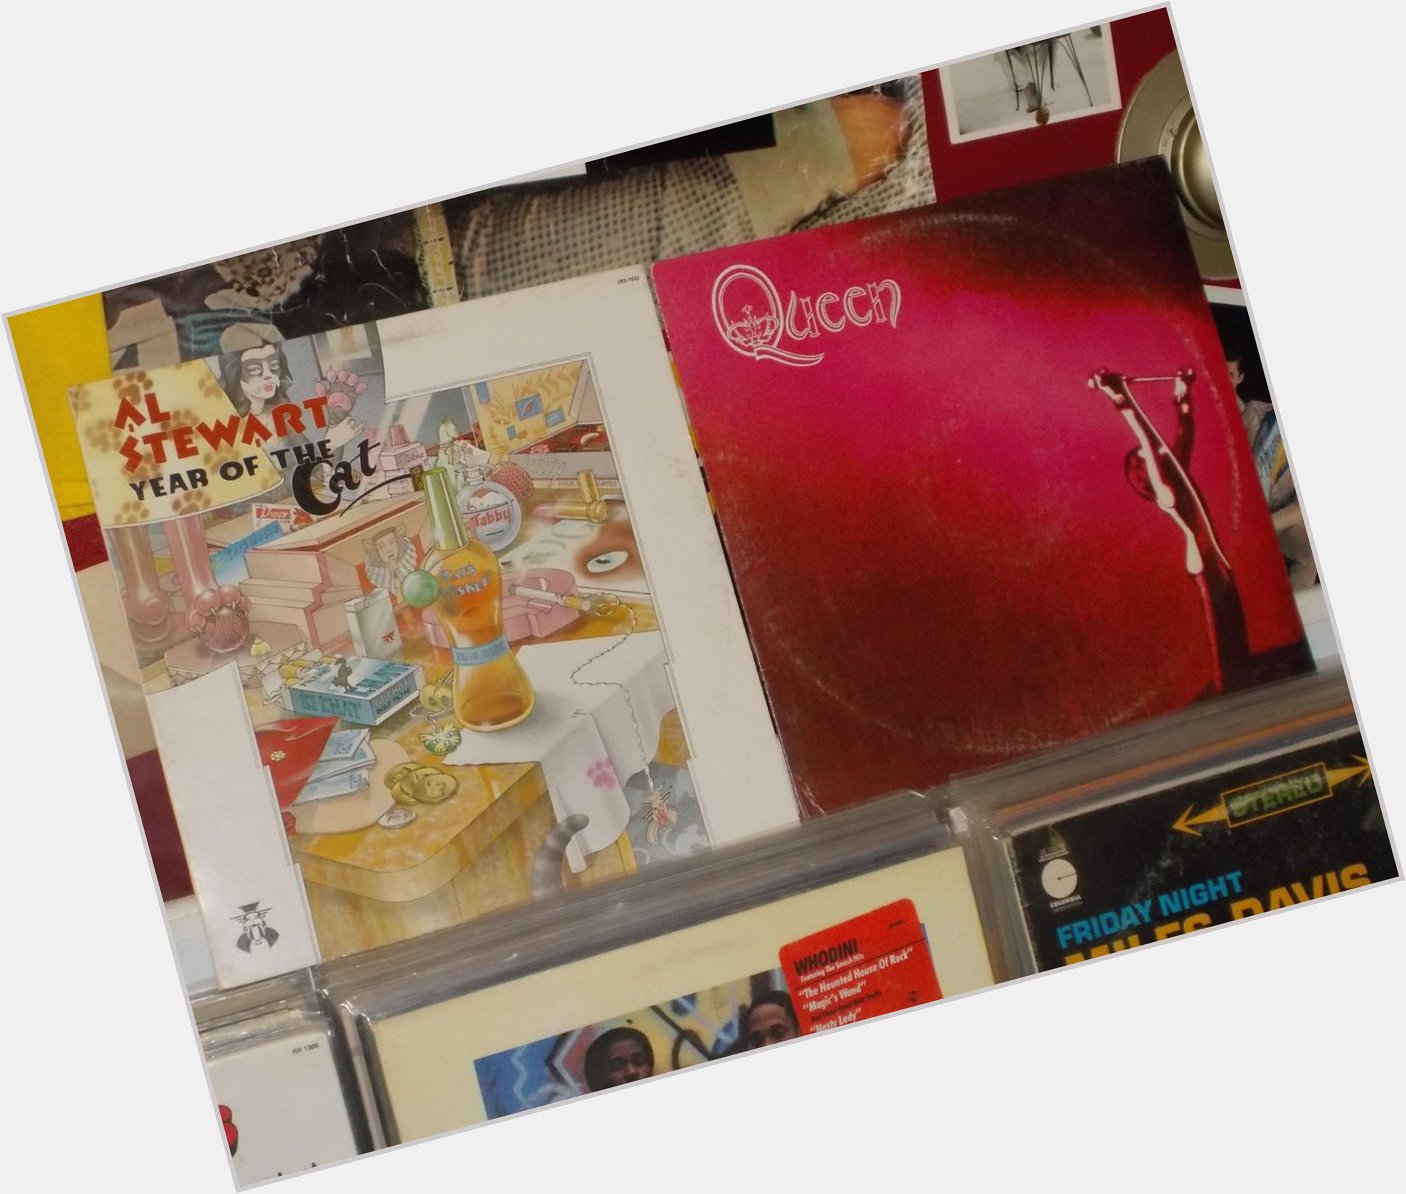 Happy Birthday to Al Stewart and the late Freddie Mercury of Queen 